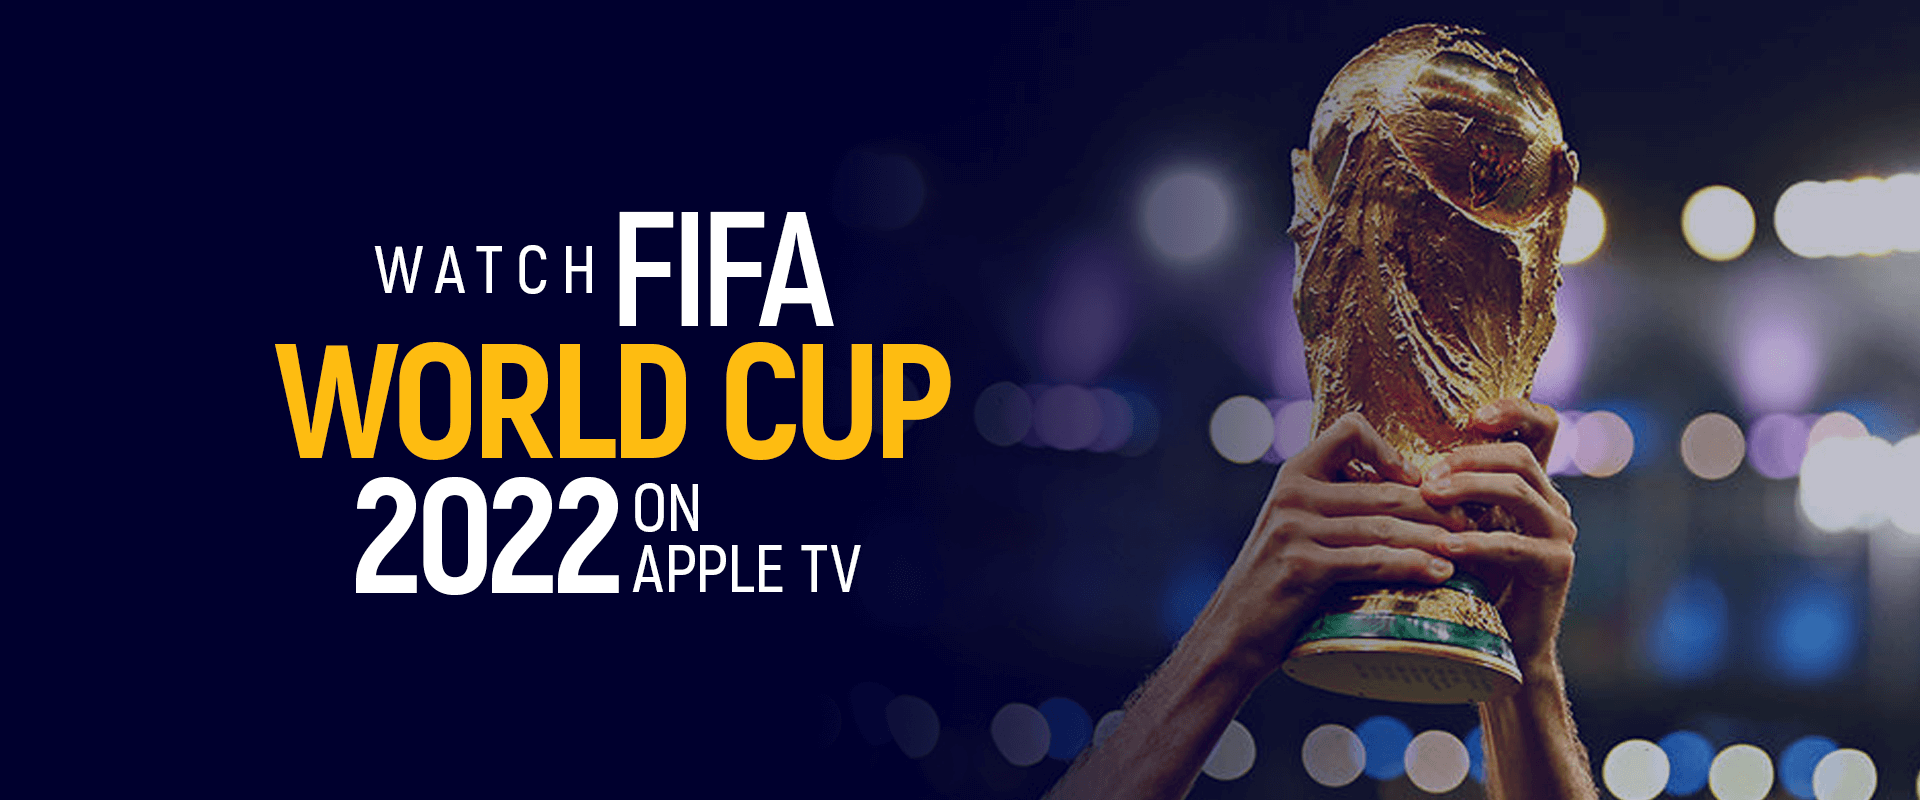 How To Watch FIFA World Cup 2022 On Apple TV